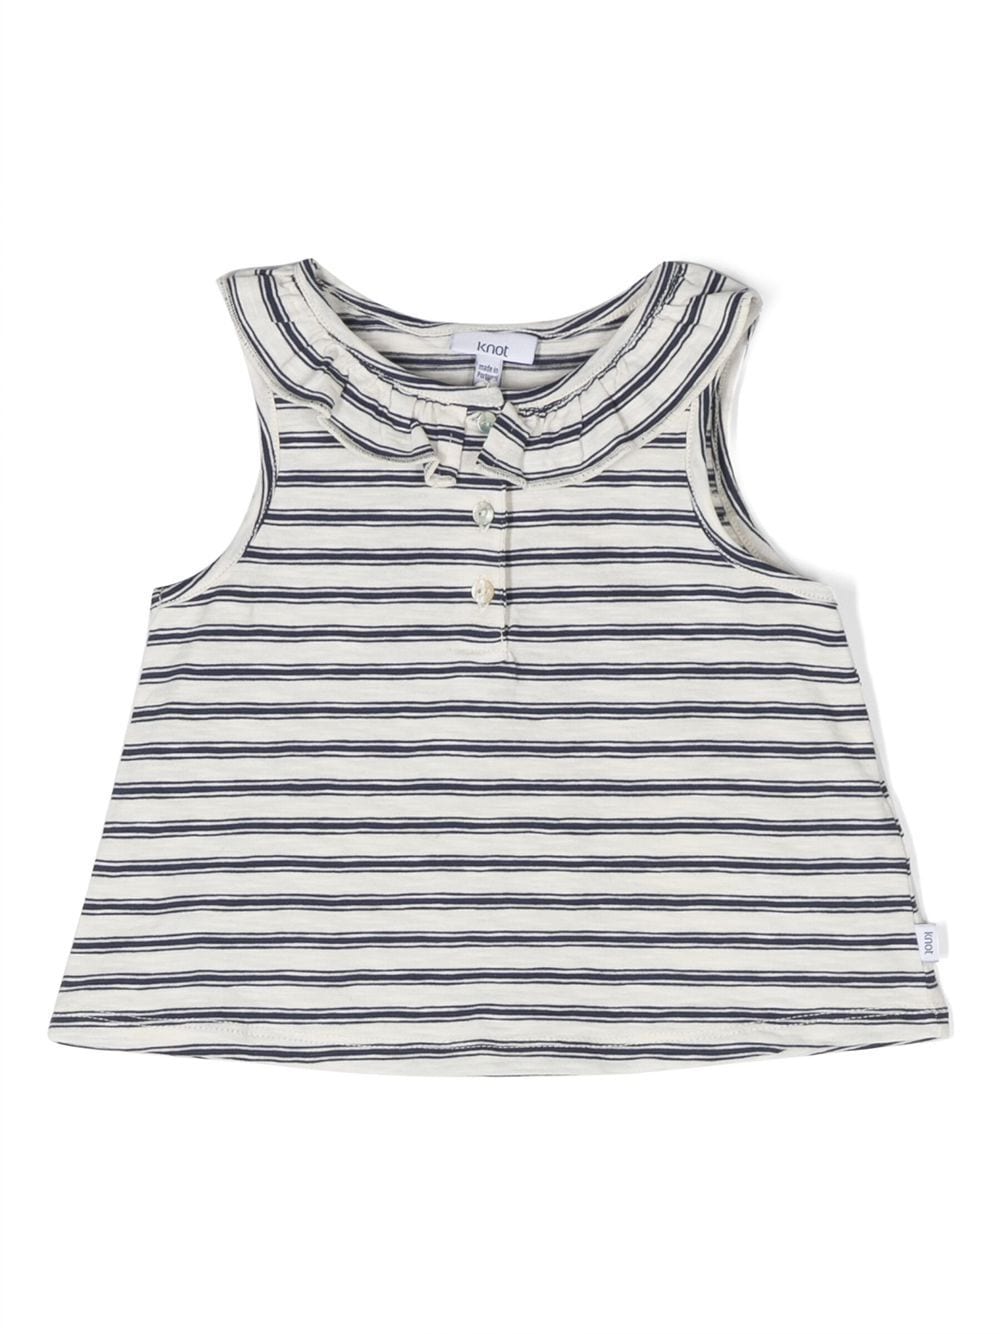 Image 1 of Knot striped sleeveless cotton blouse